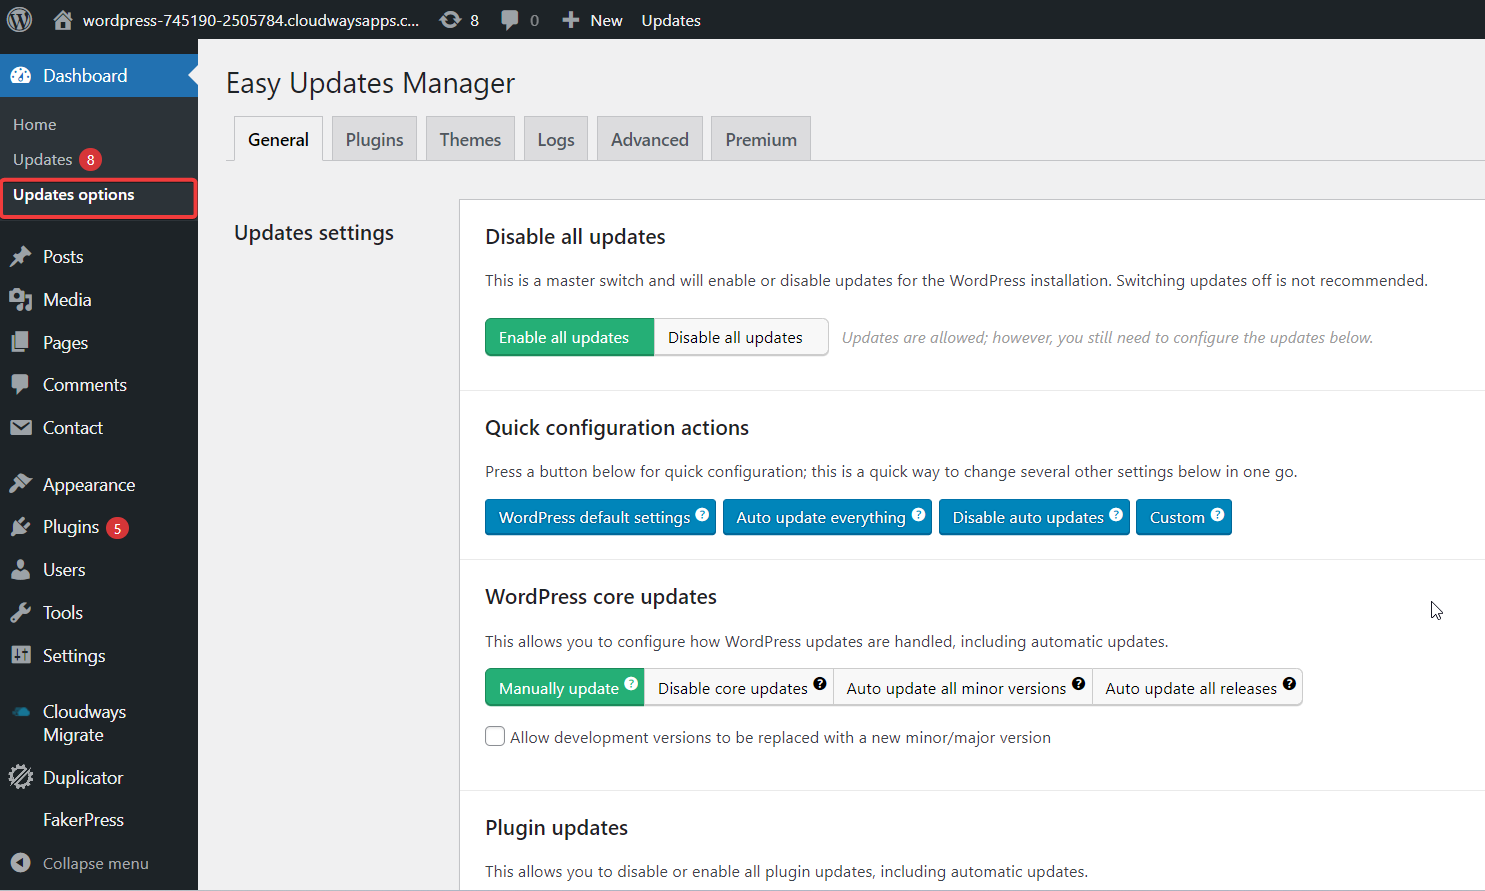 Easy Update Manager - Update Options